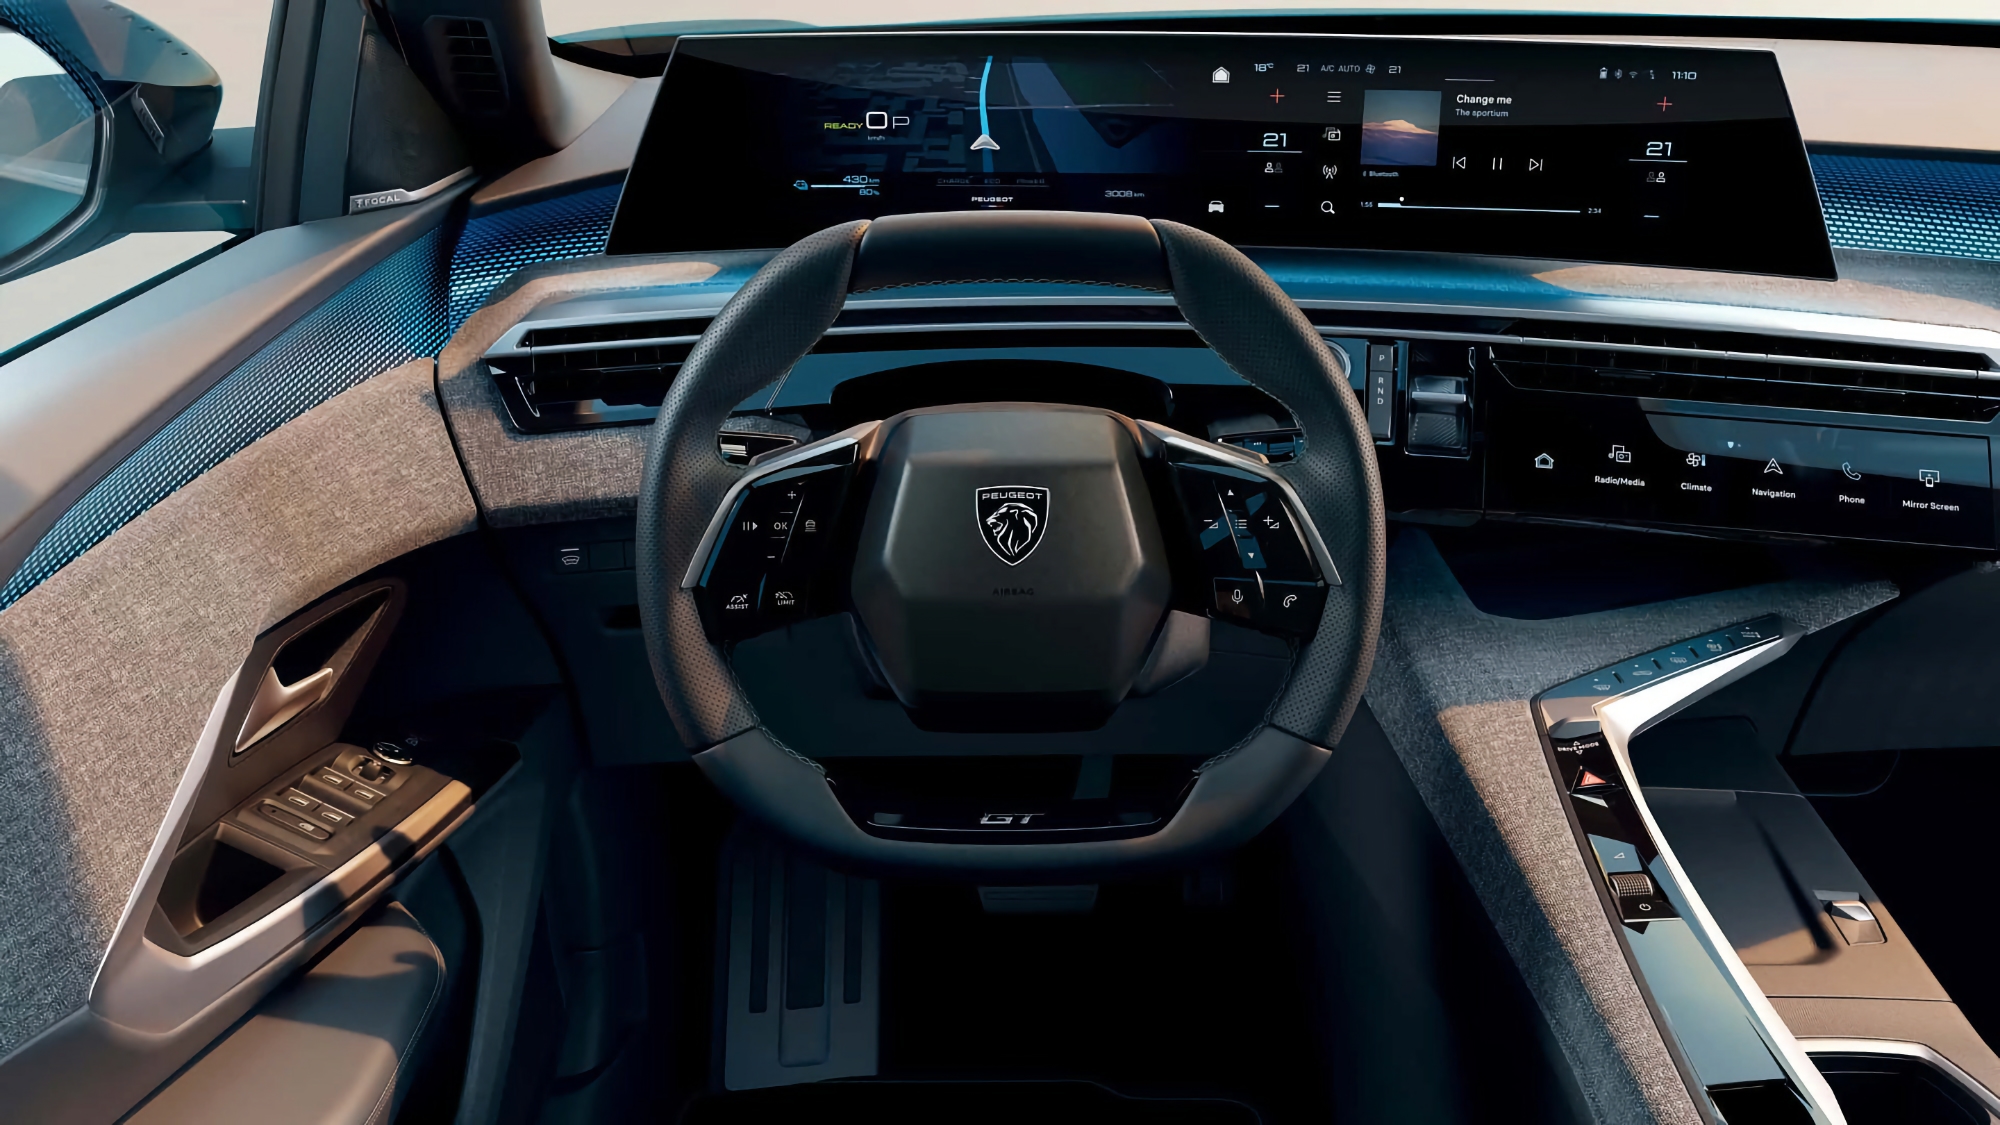 Peugeot reveals redesigned i-Cockpit with 21-inch curved display for new 3008 electric car